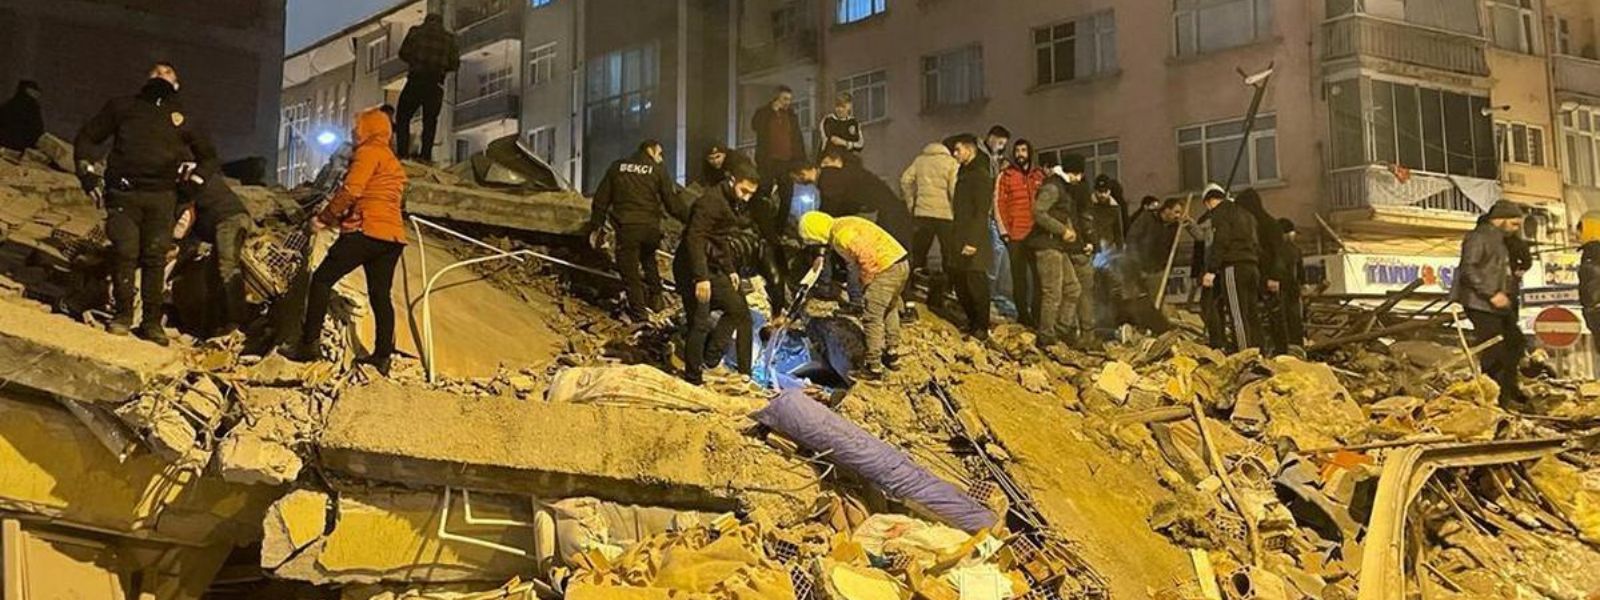 Massive 7.8 earthquake kills over 500, injures 2,000 in Turkey and Syria